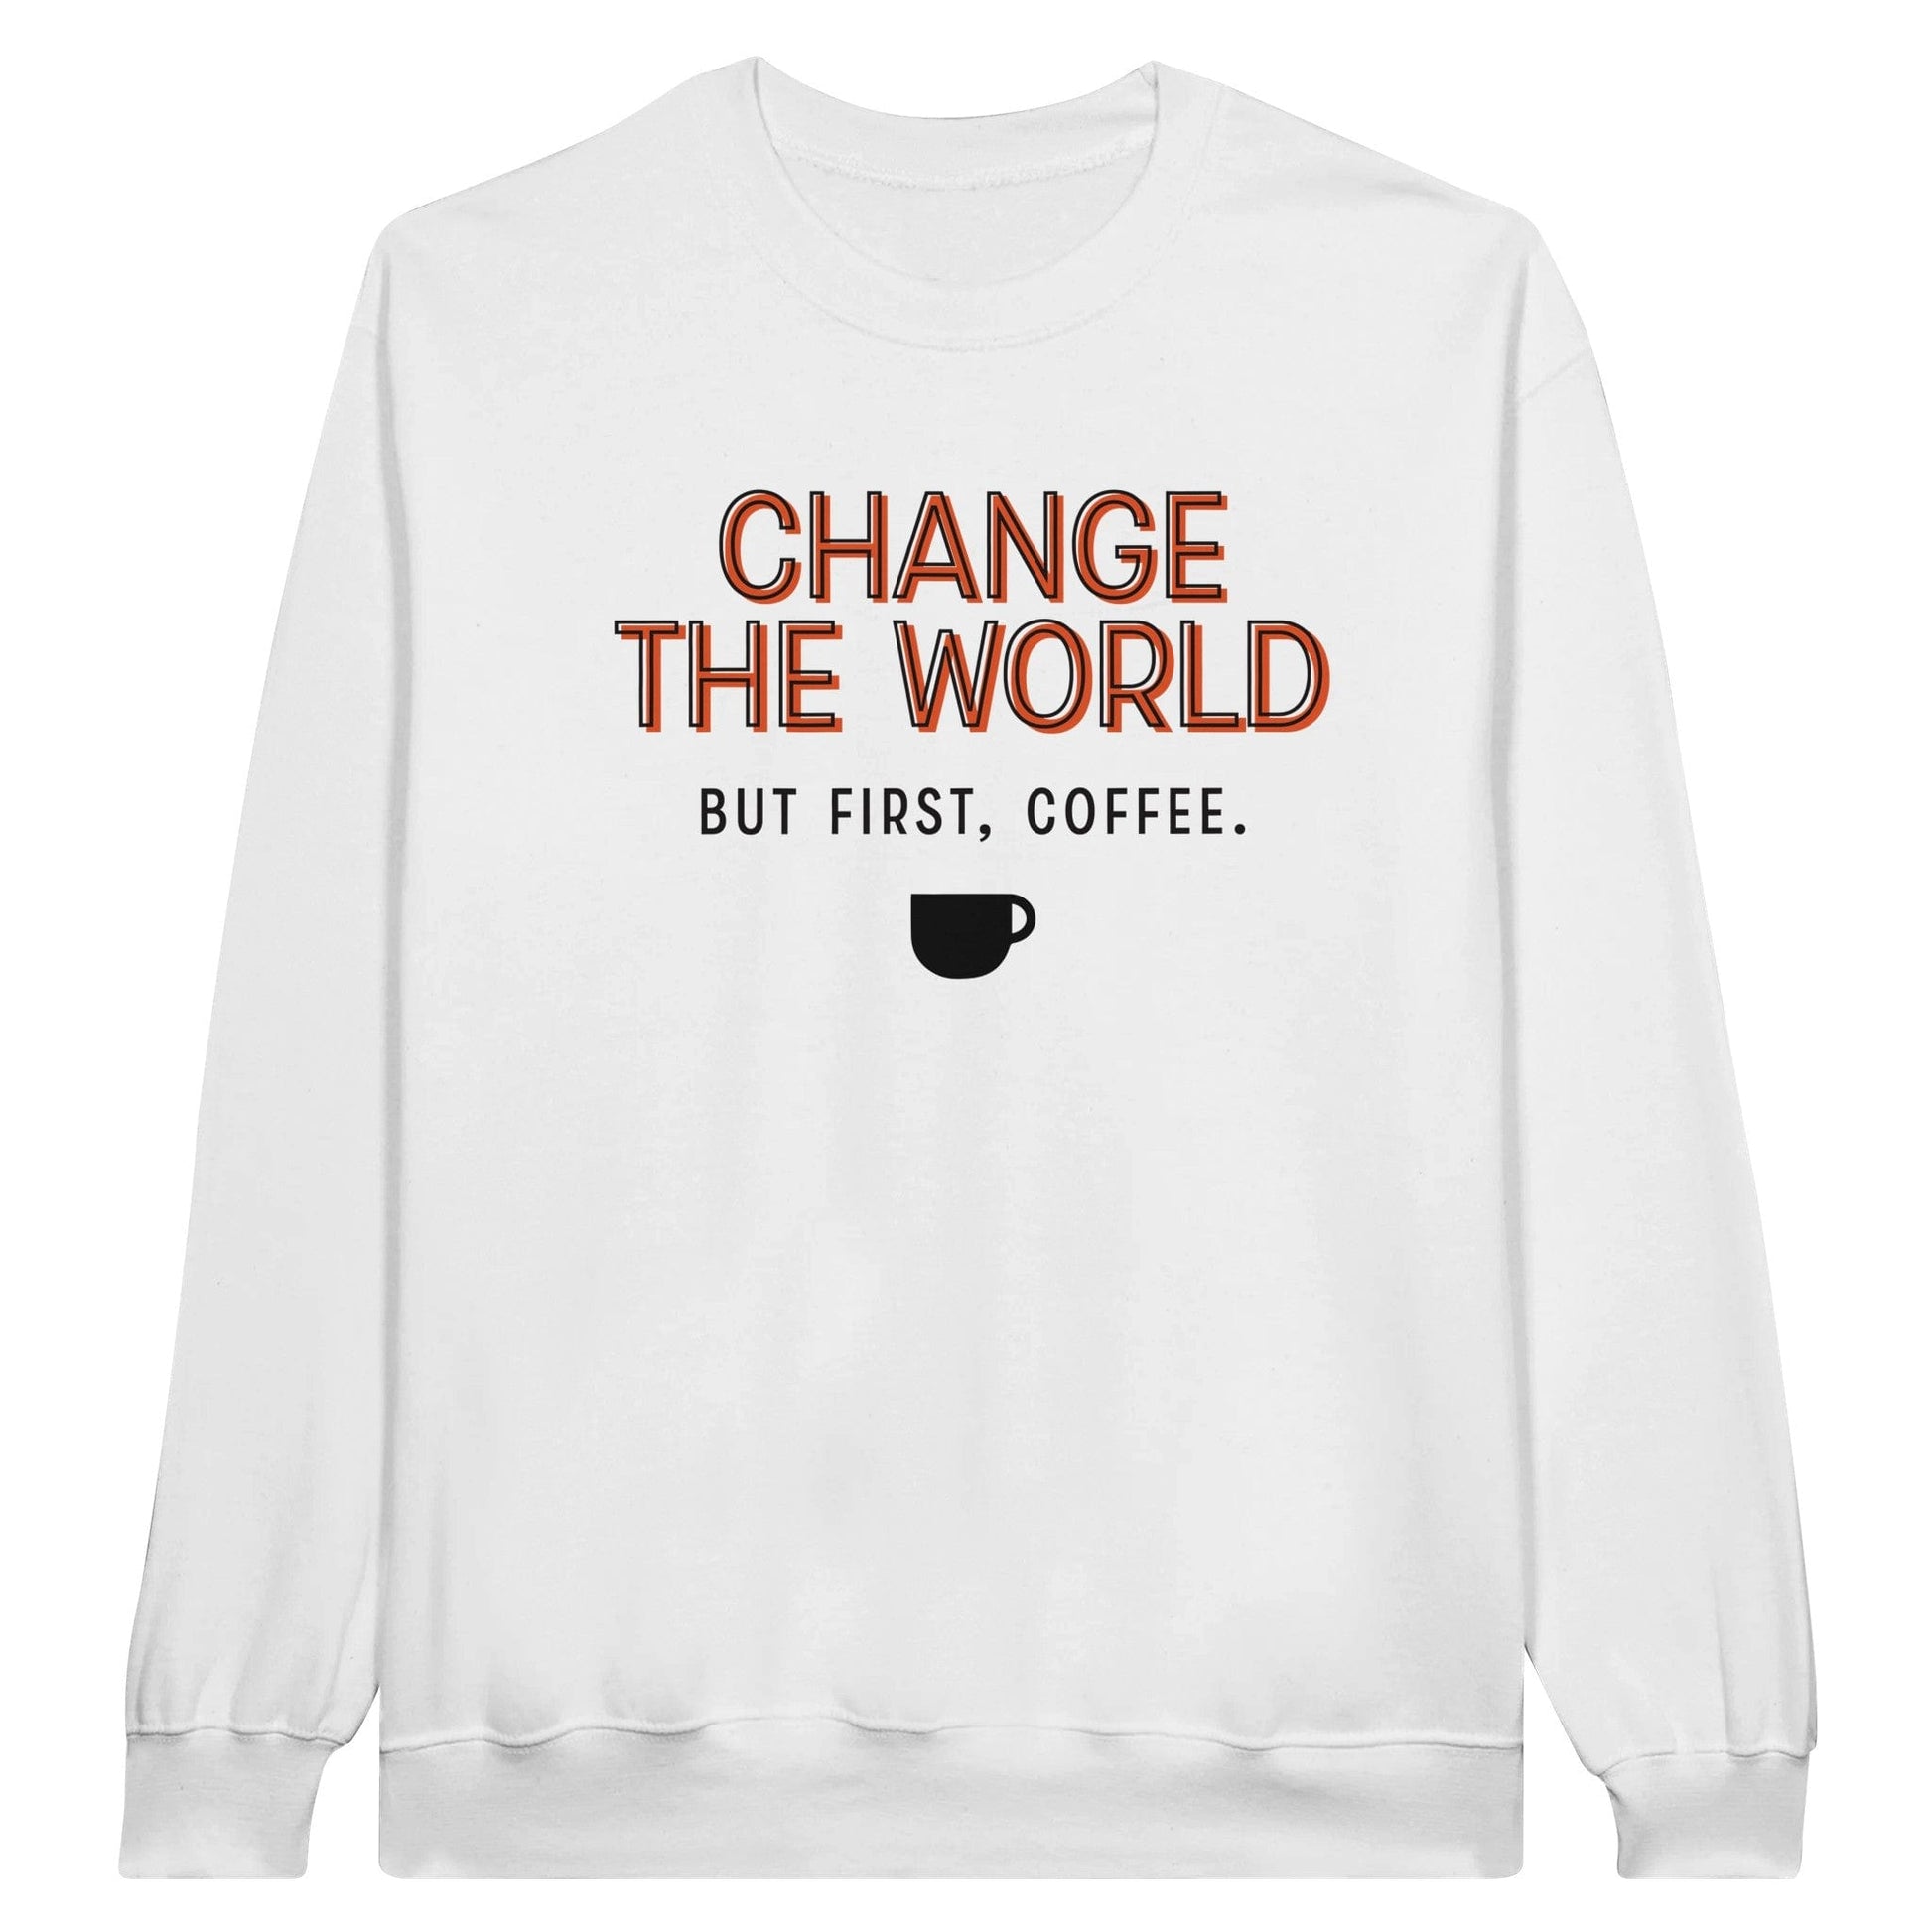 Good Bean Gifts "Change The World - But First Coffee" - Classic Crewneck Sweatshirt S / White